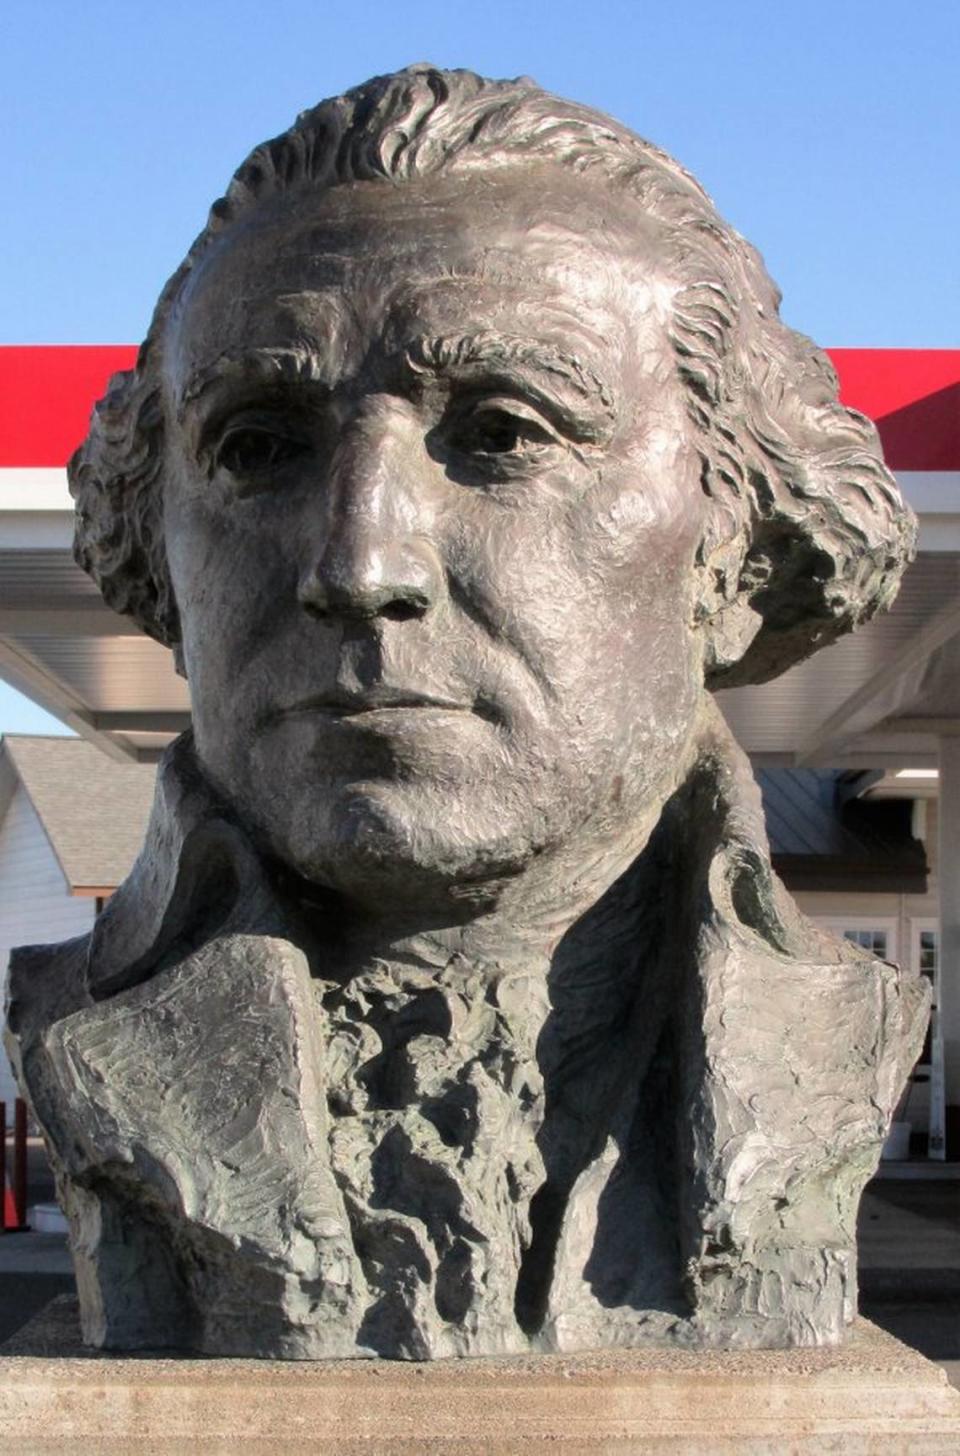 A replica bust of George Washington greets visitors as they enter the city of George, Washington. Courtesy: City of George